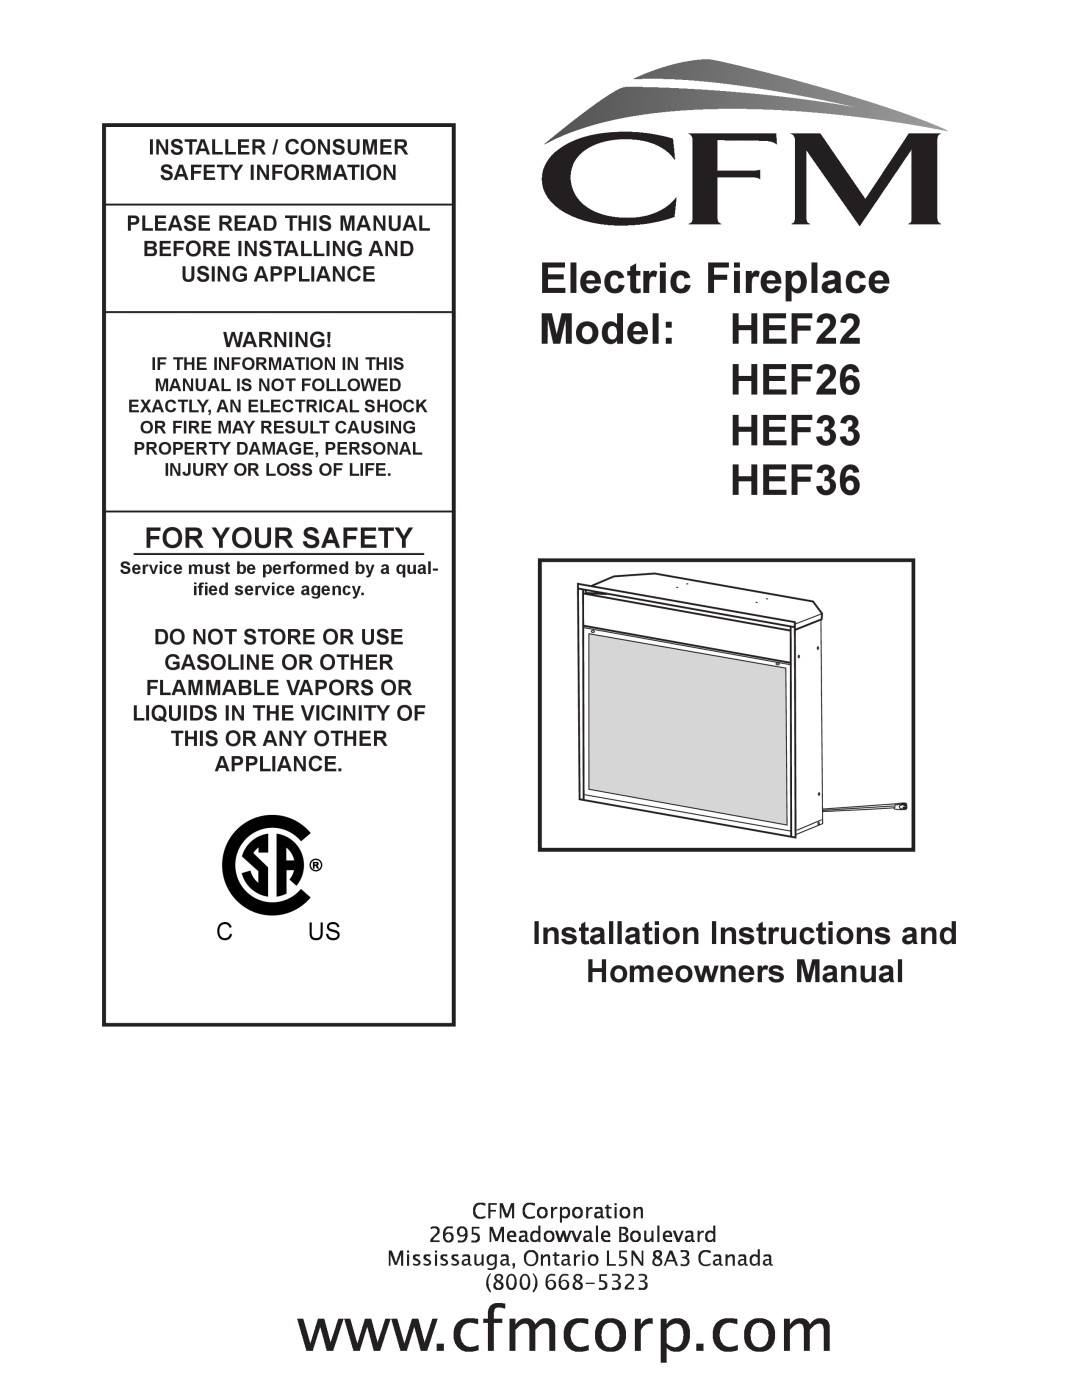 Vermont Casting installation instructions HEF26 HEF33 HEF36, Safety Information, Please Read This Manual, Appliance 